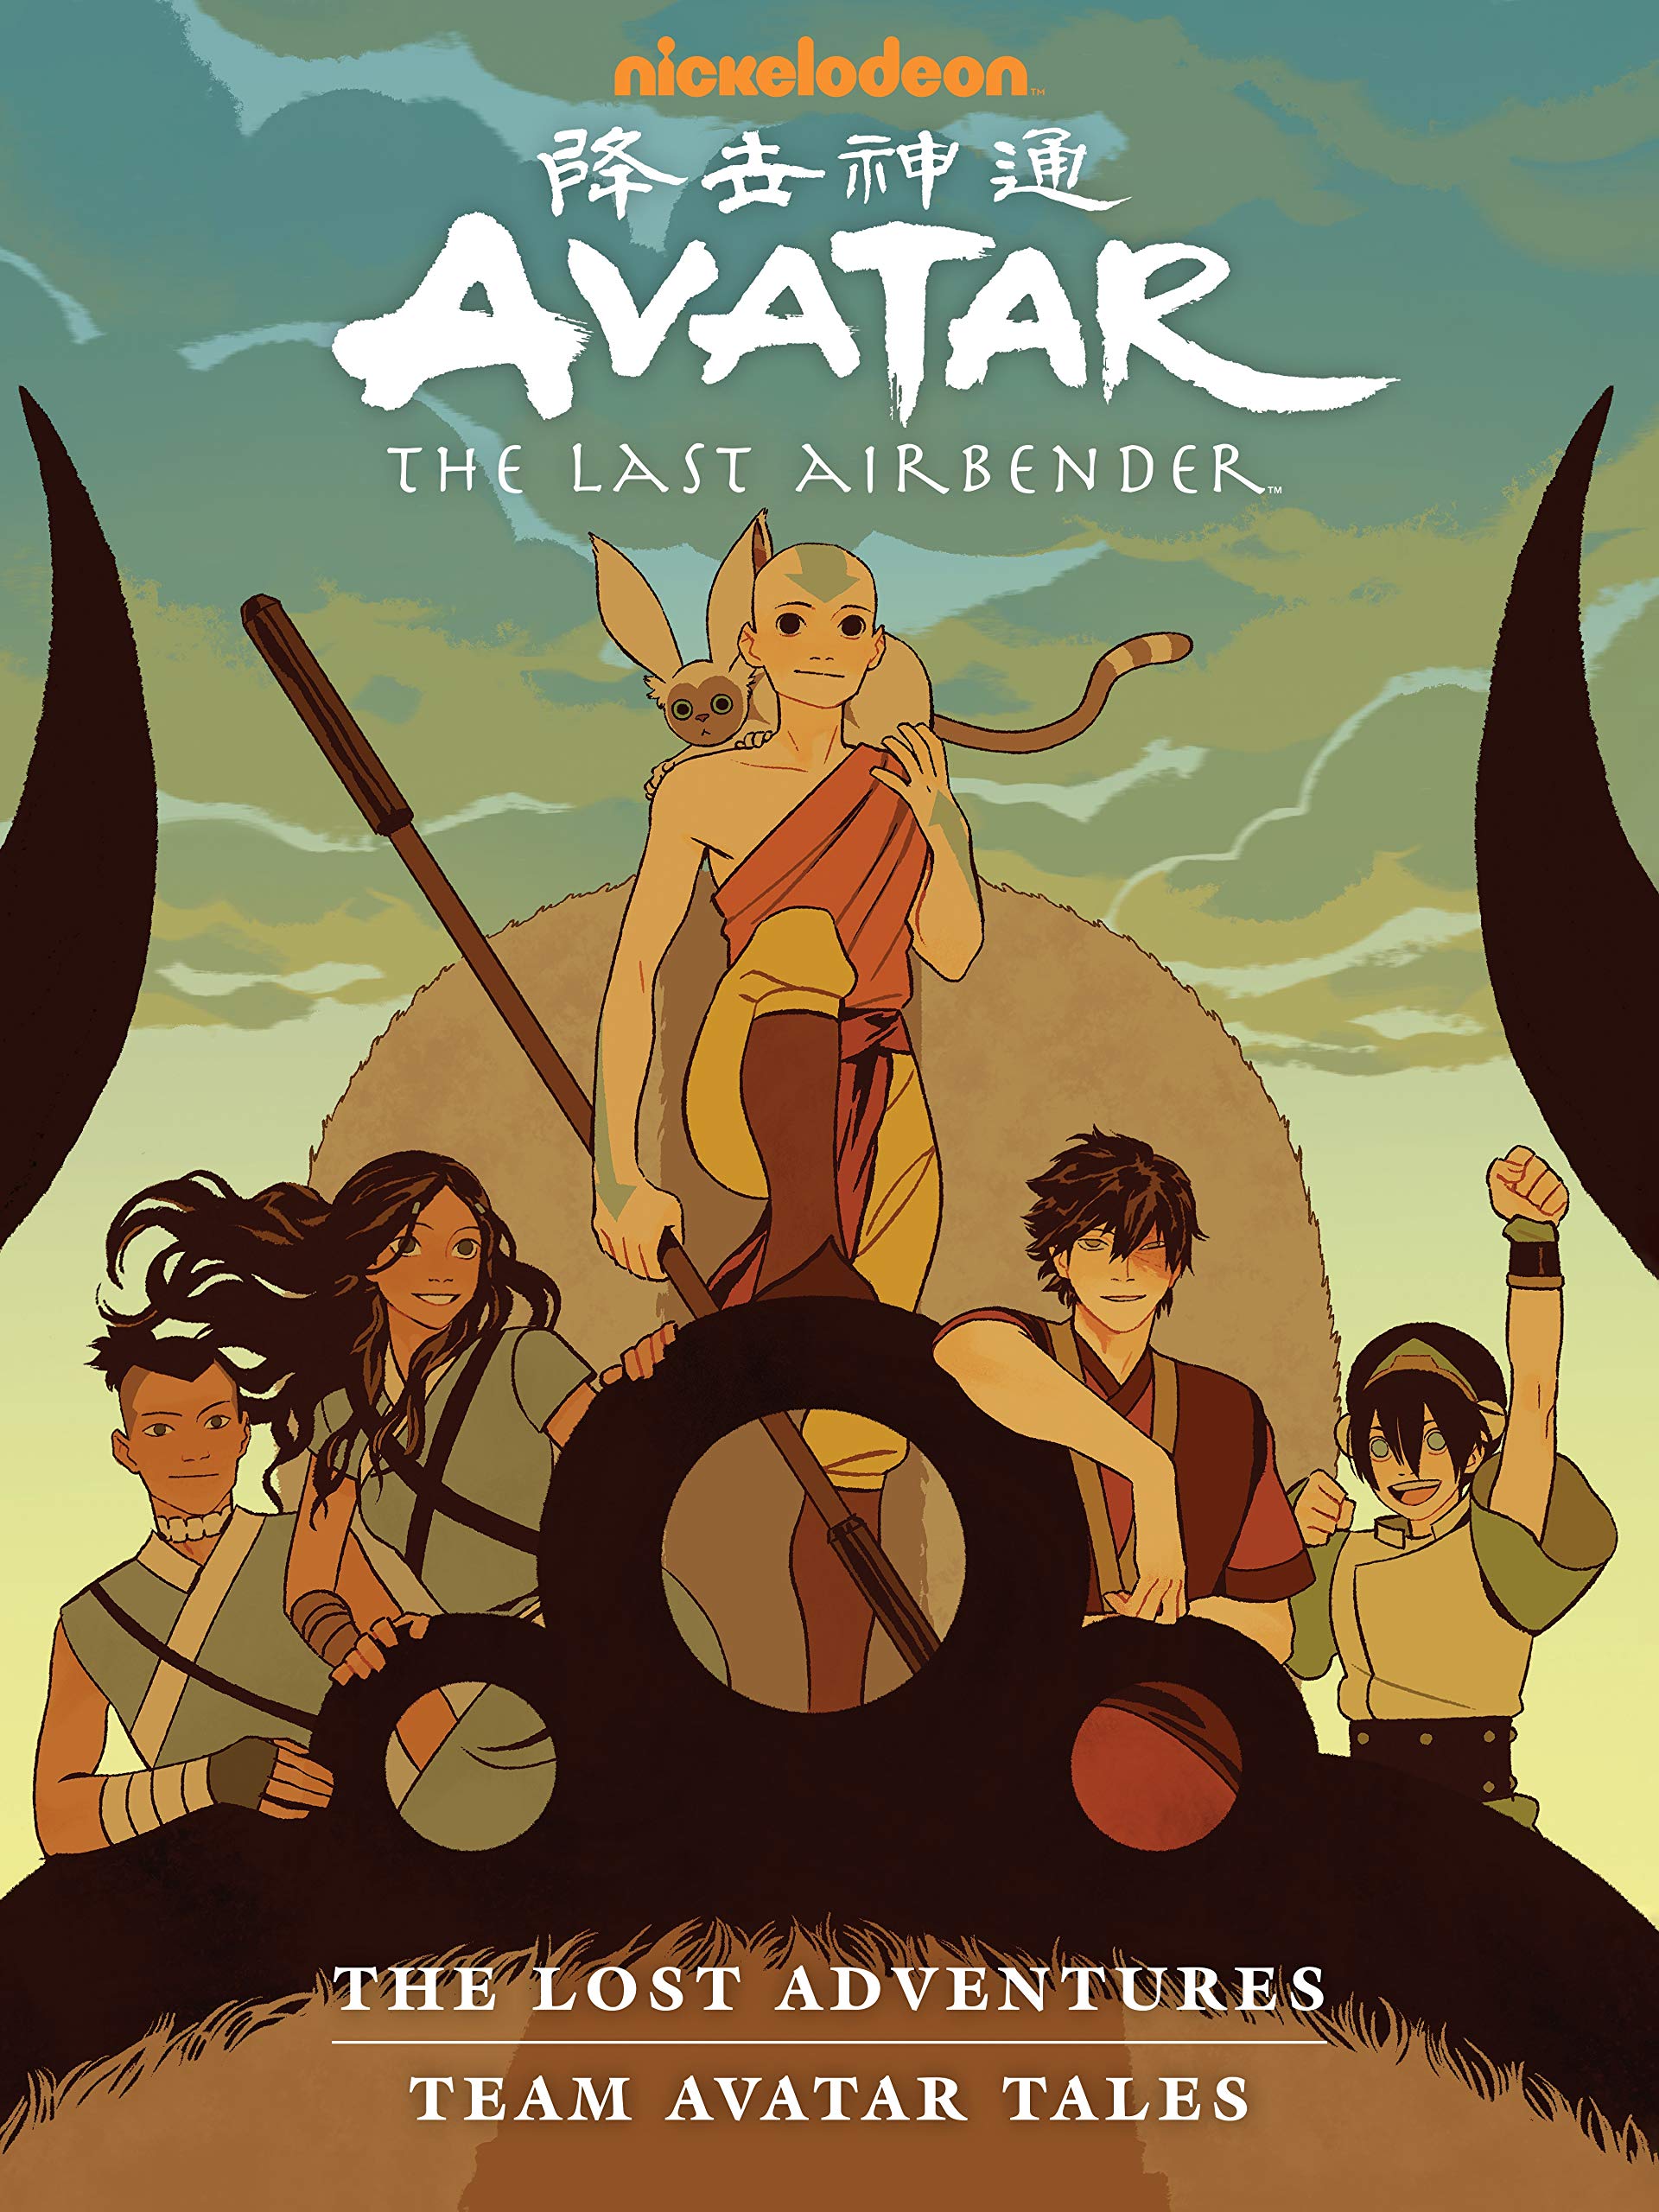 Mua Avatar: The Last Airbender - The Lost Adventures and Team Avatar Tales  Library Edition trên Amazon Anh chính hãng 2023 | Giaonhan247